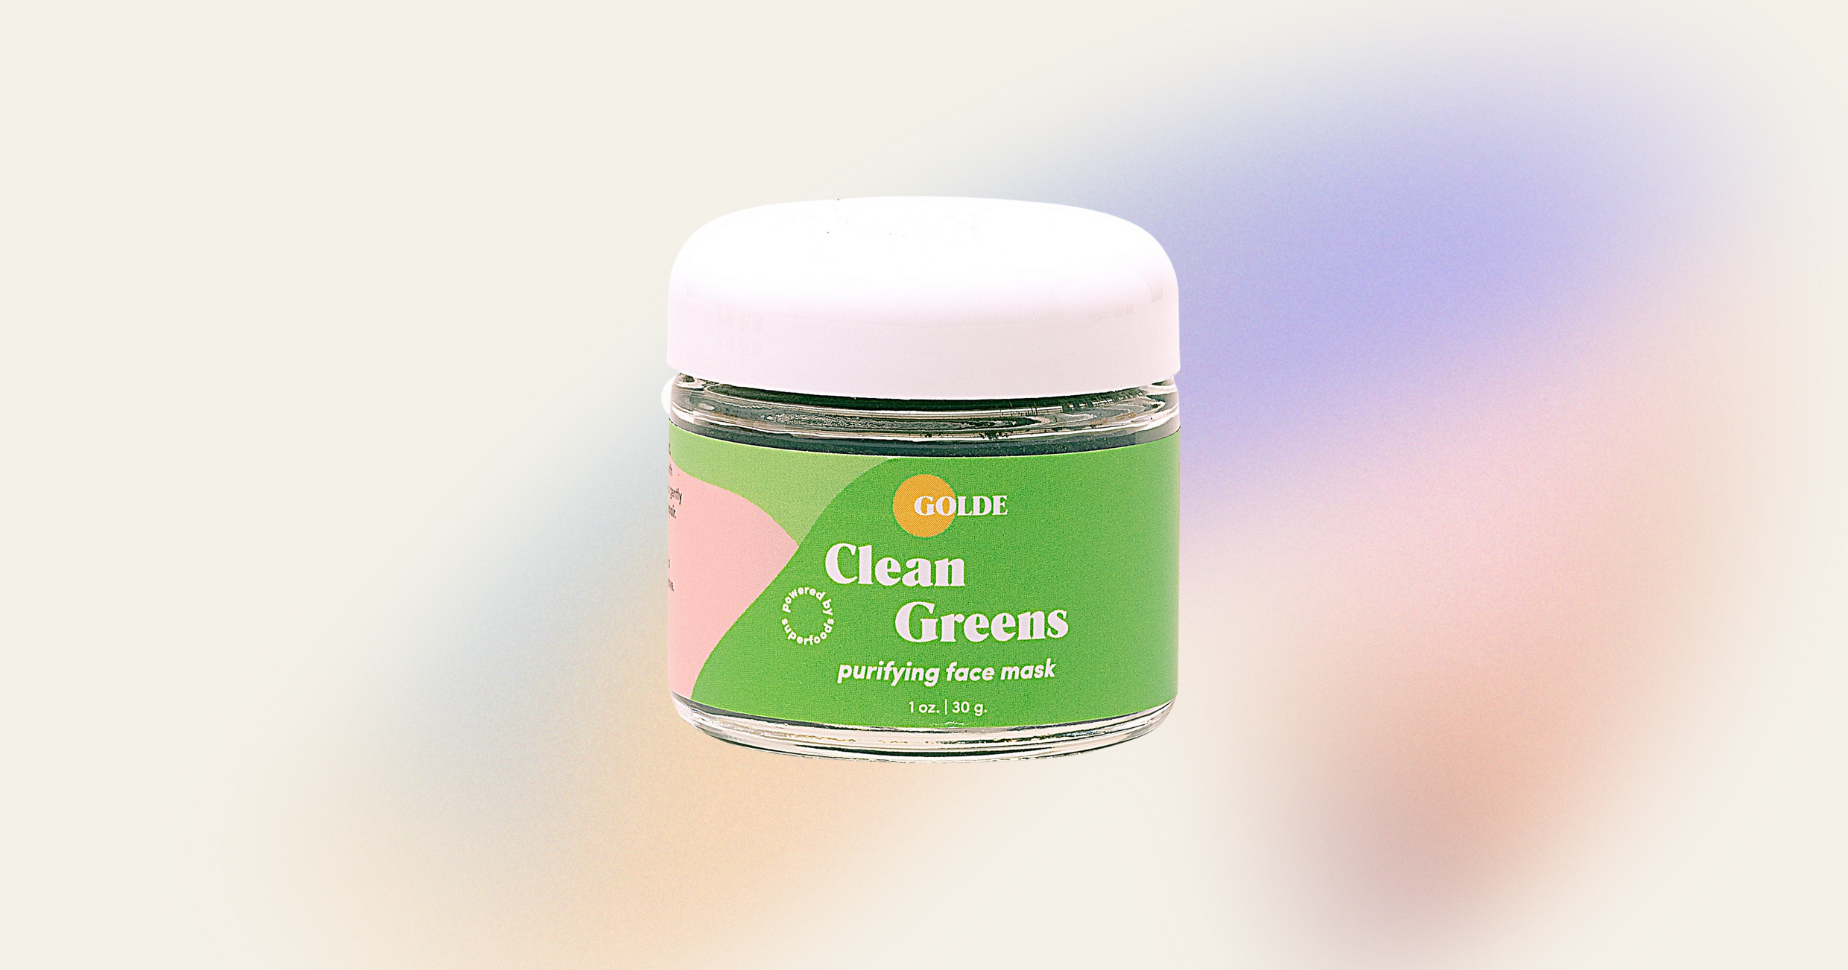 Clean Greens Face Mask from Golde